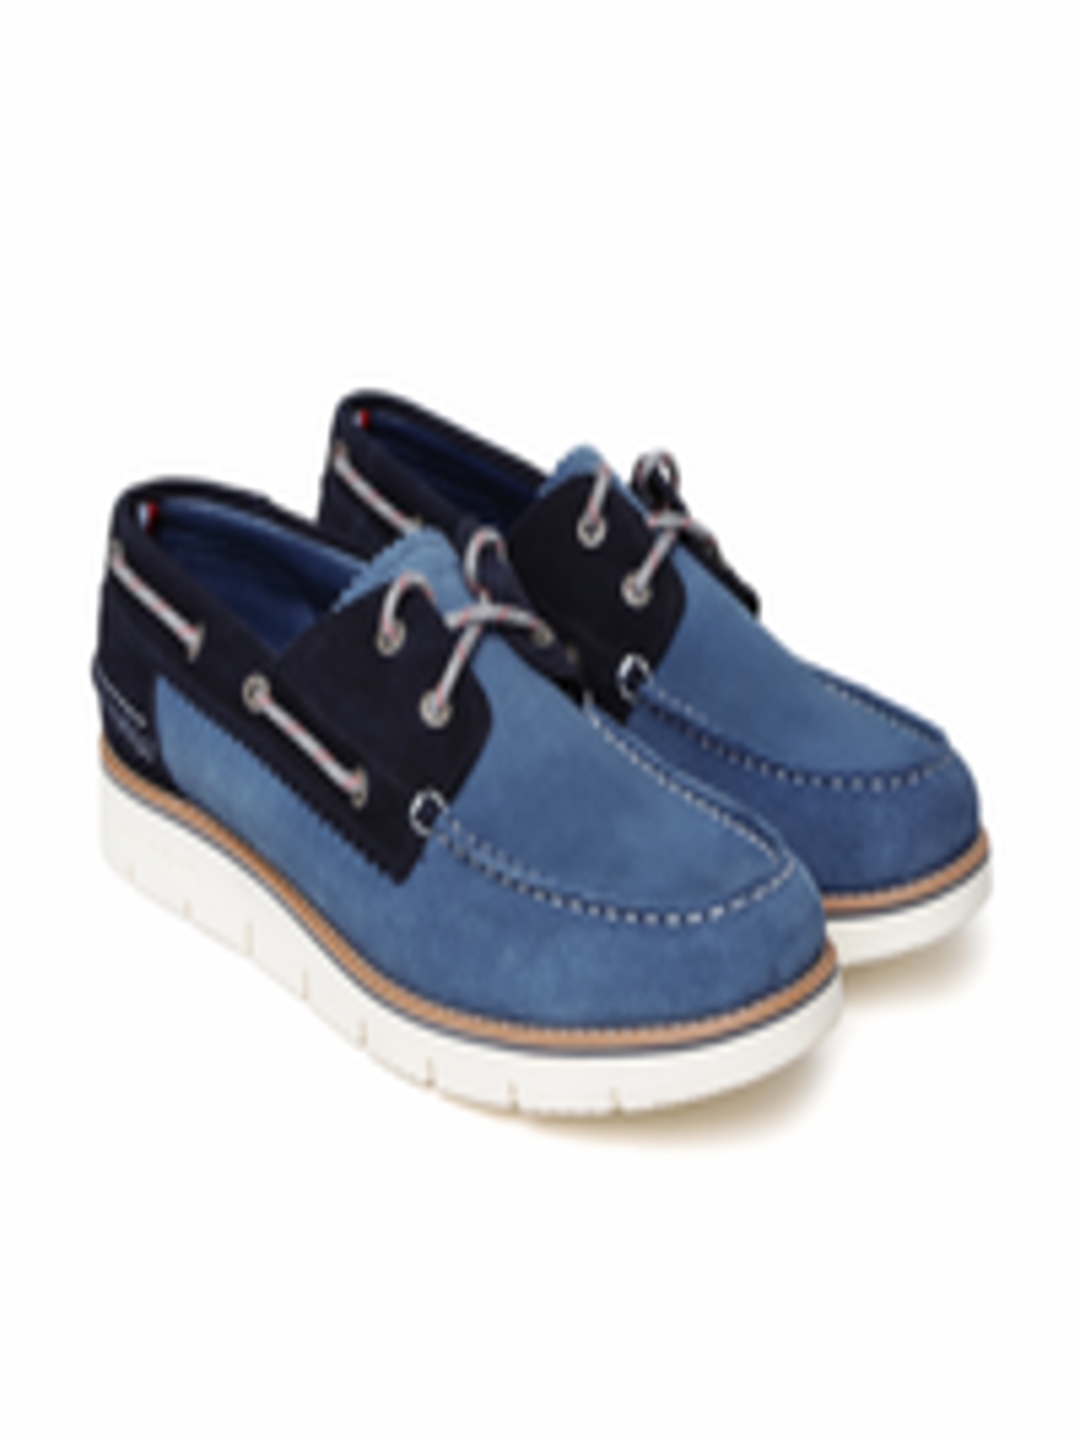 Buy Tommy Hilfiger Men Blue Colourblocked Suede Boat Shoes - Casual ...